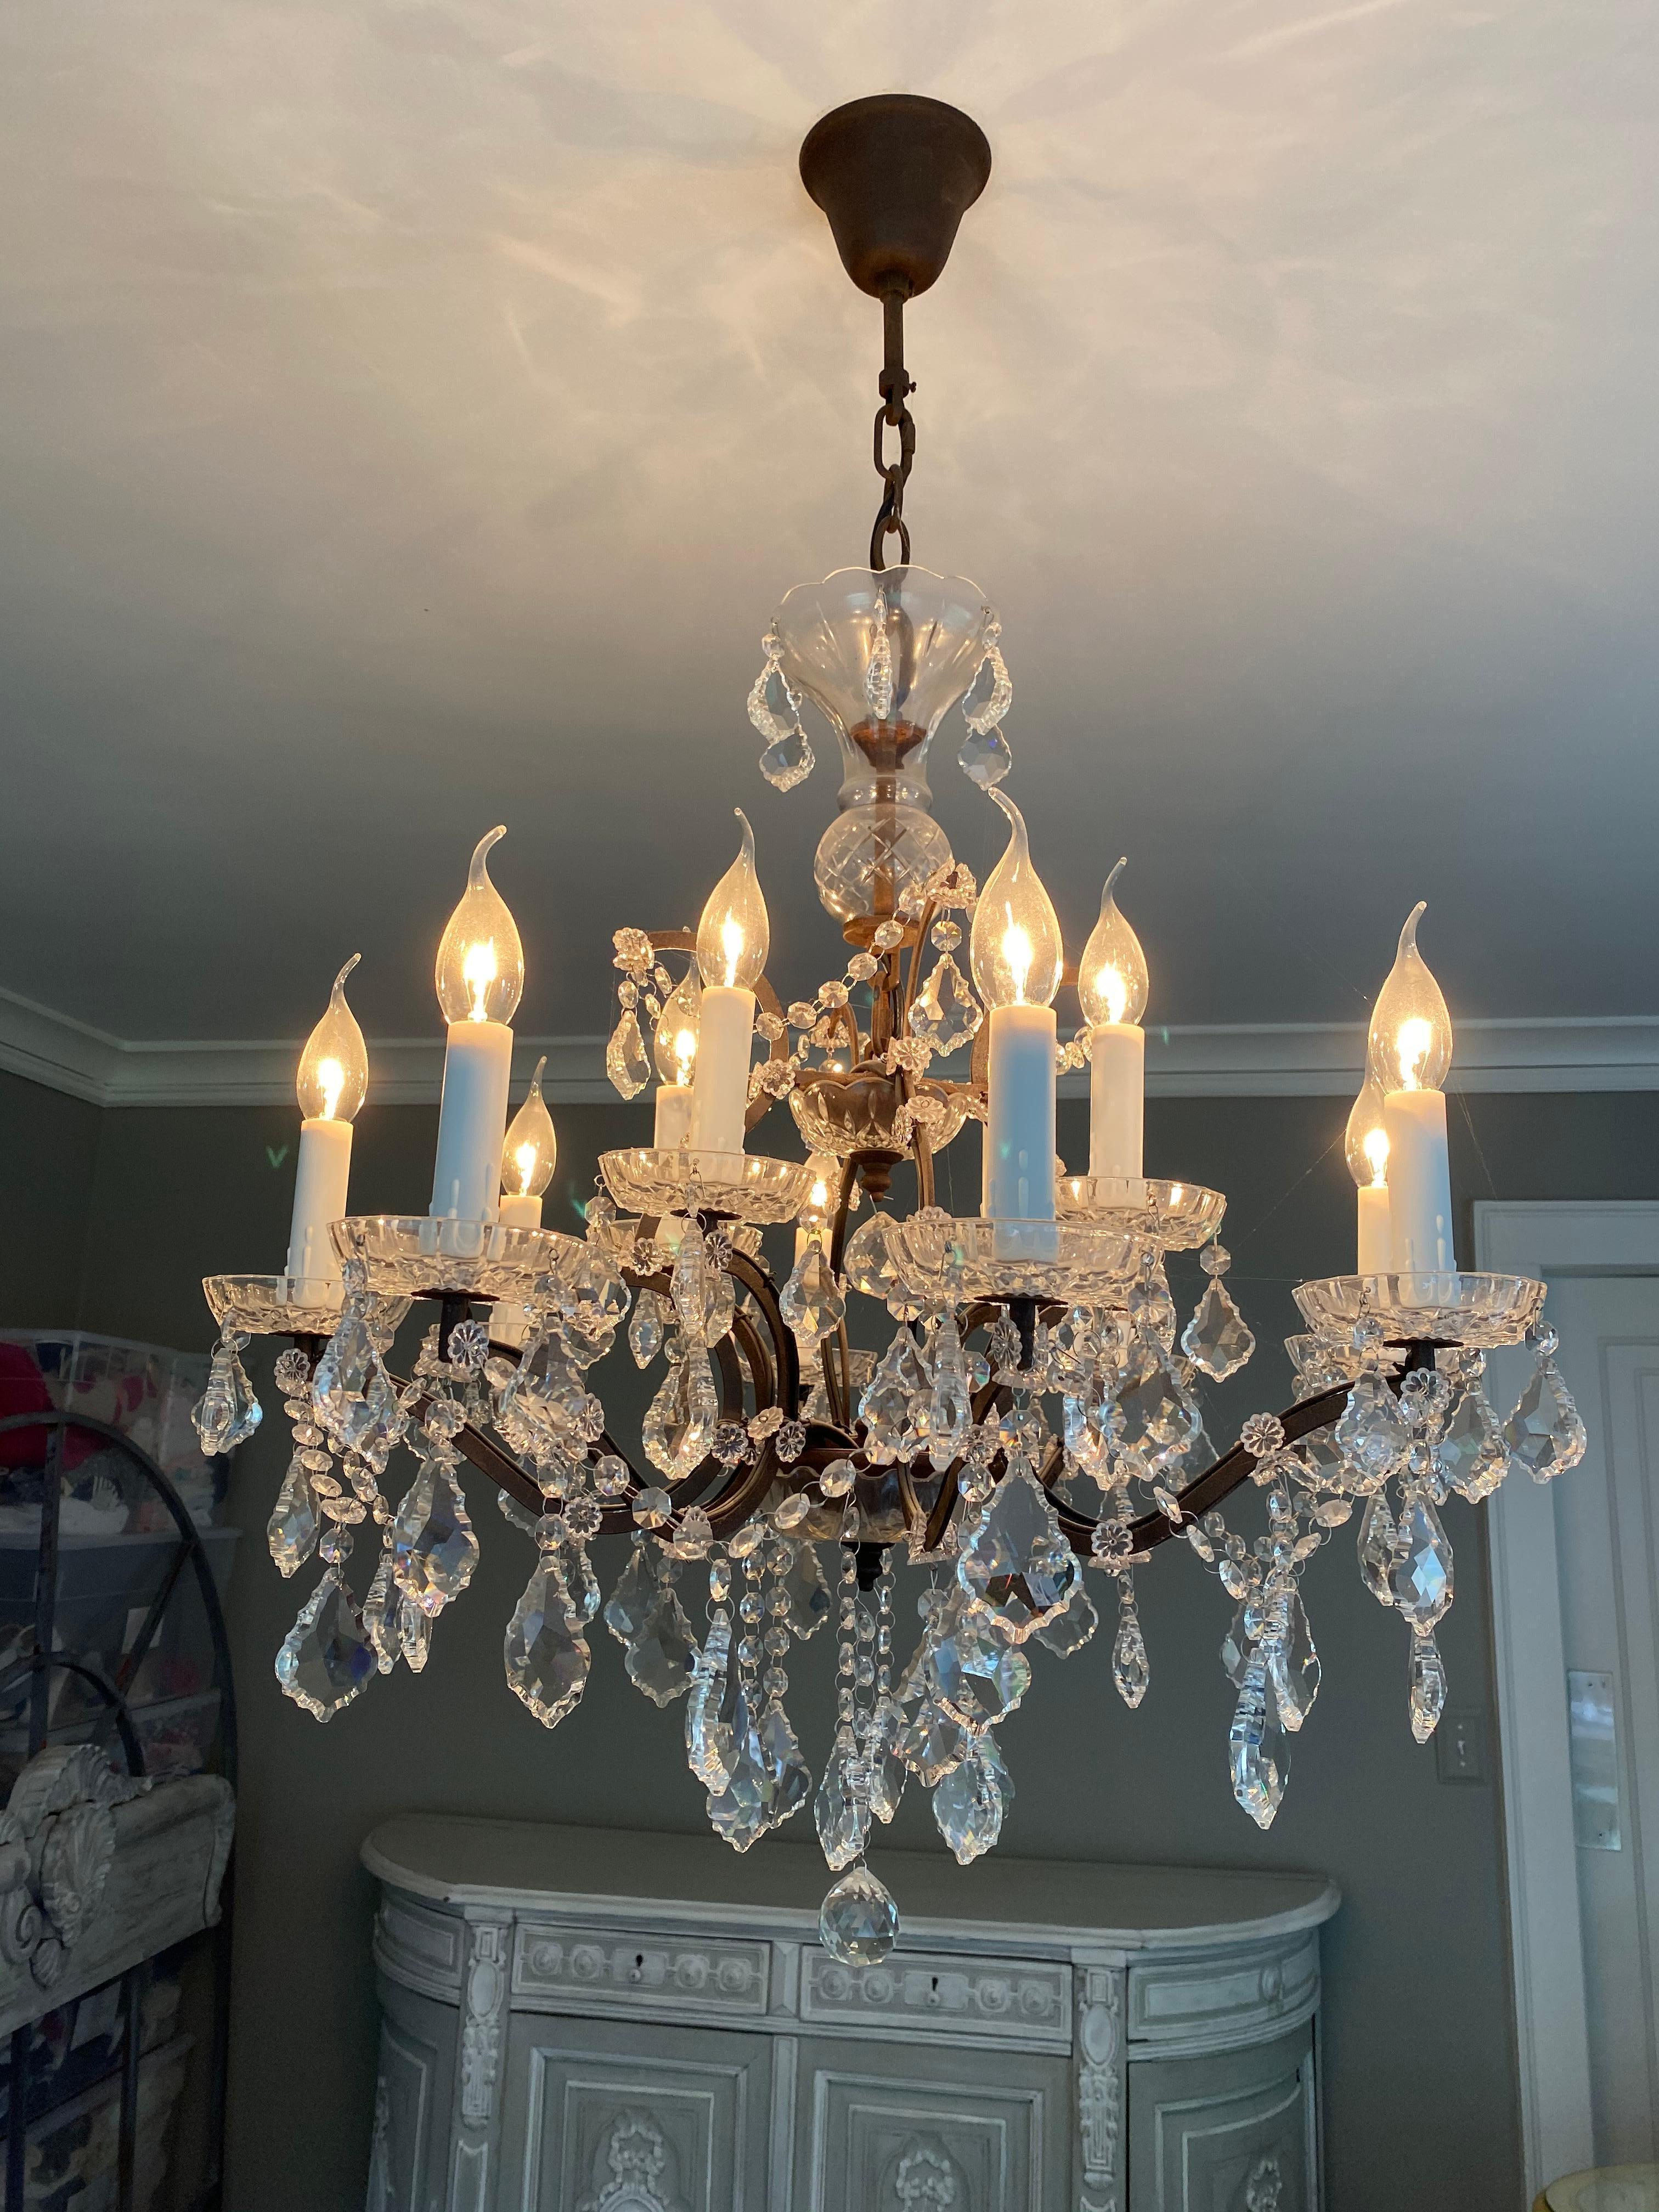 Rococo crystal and bronze 8-armed chandelier
Impressive and elegant, this large 8-armed crystal chandelier includes droplet crystals, iron and bronze frame
Strung with hundreds of light-refracting glass crystals
Curved arms raise